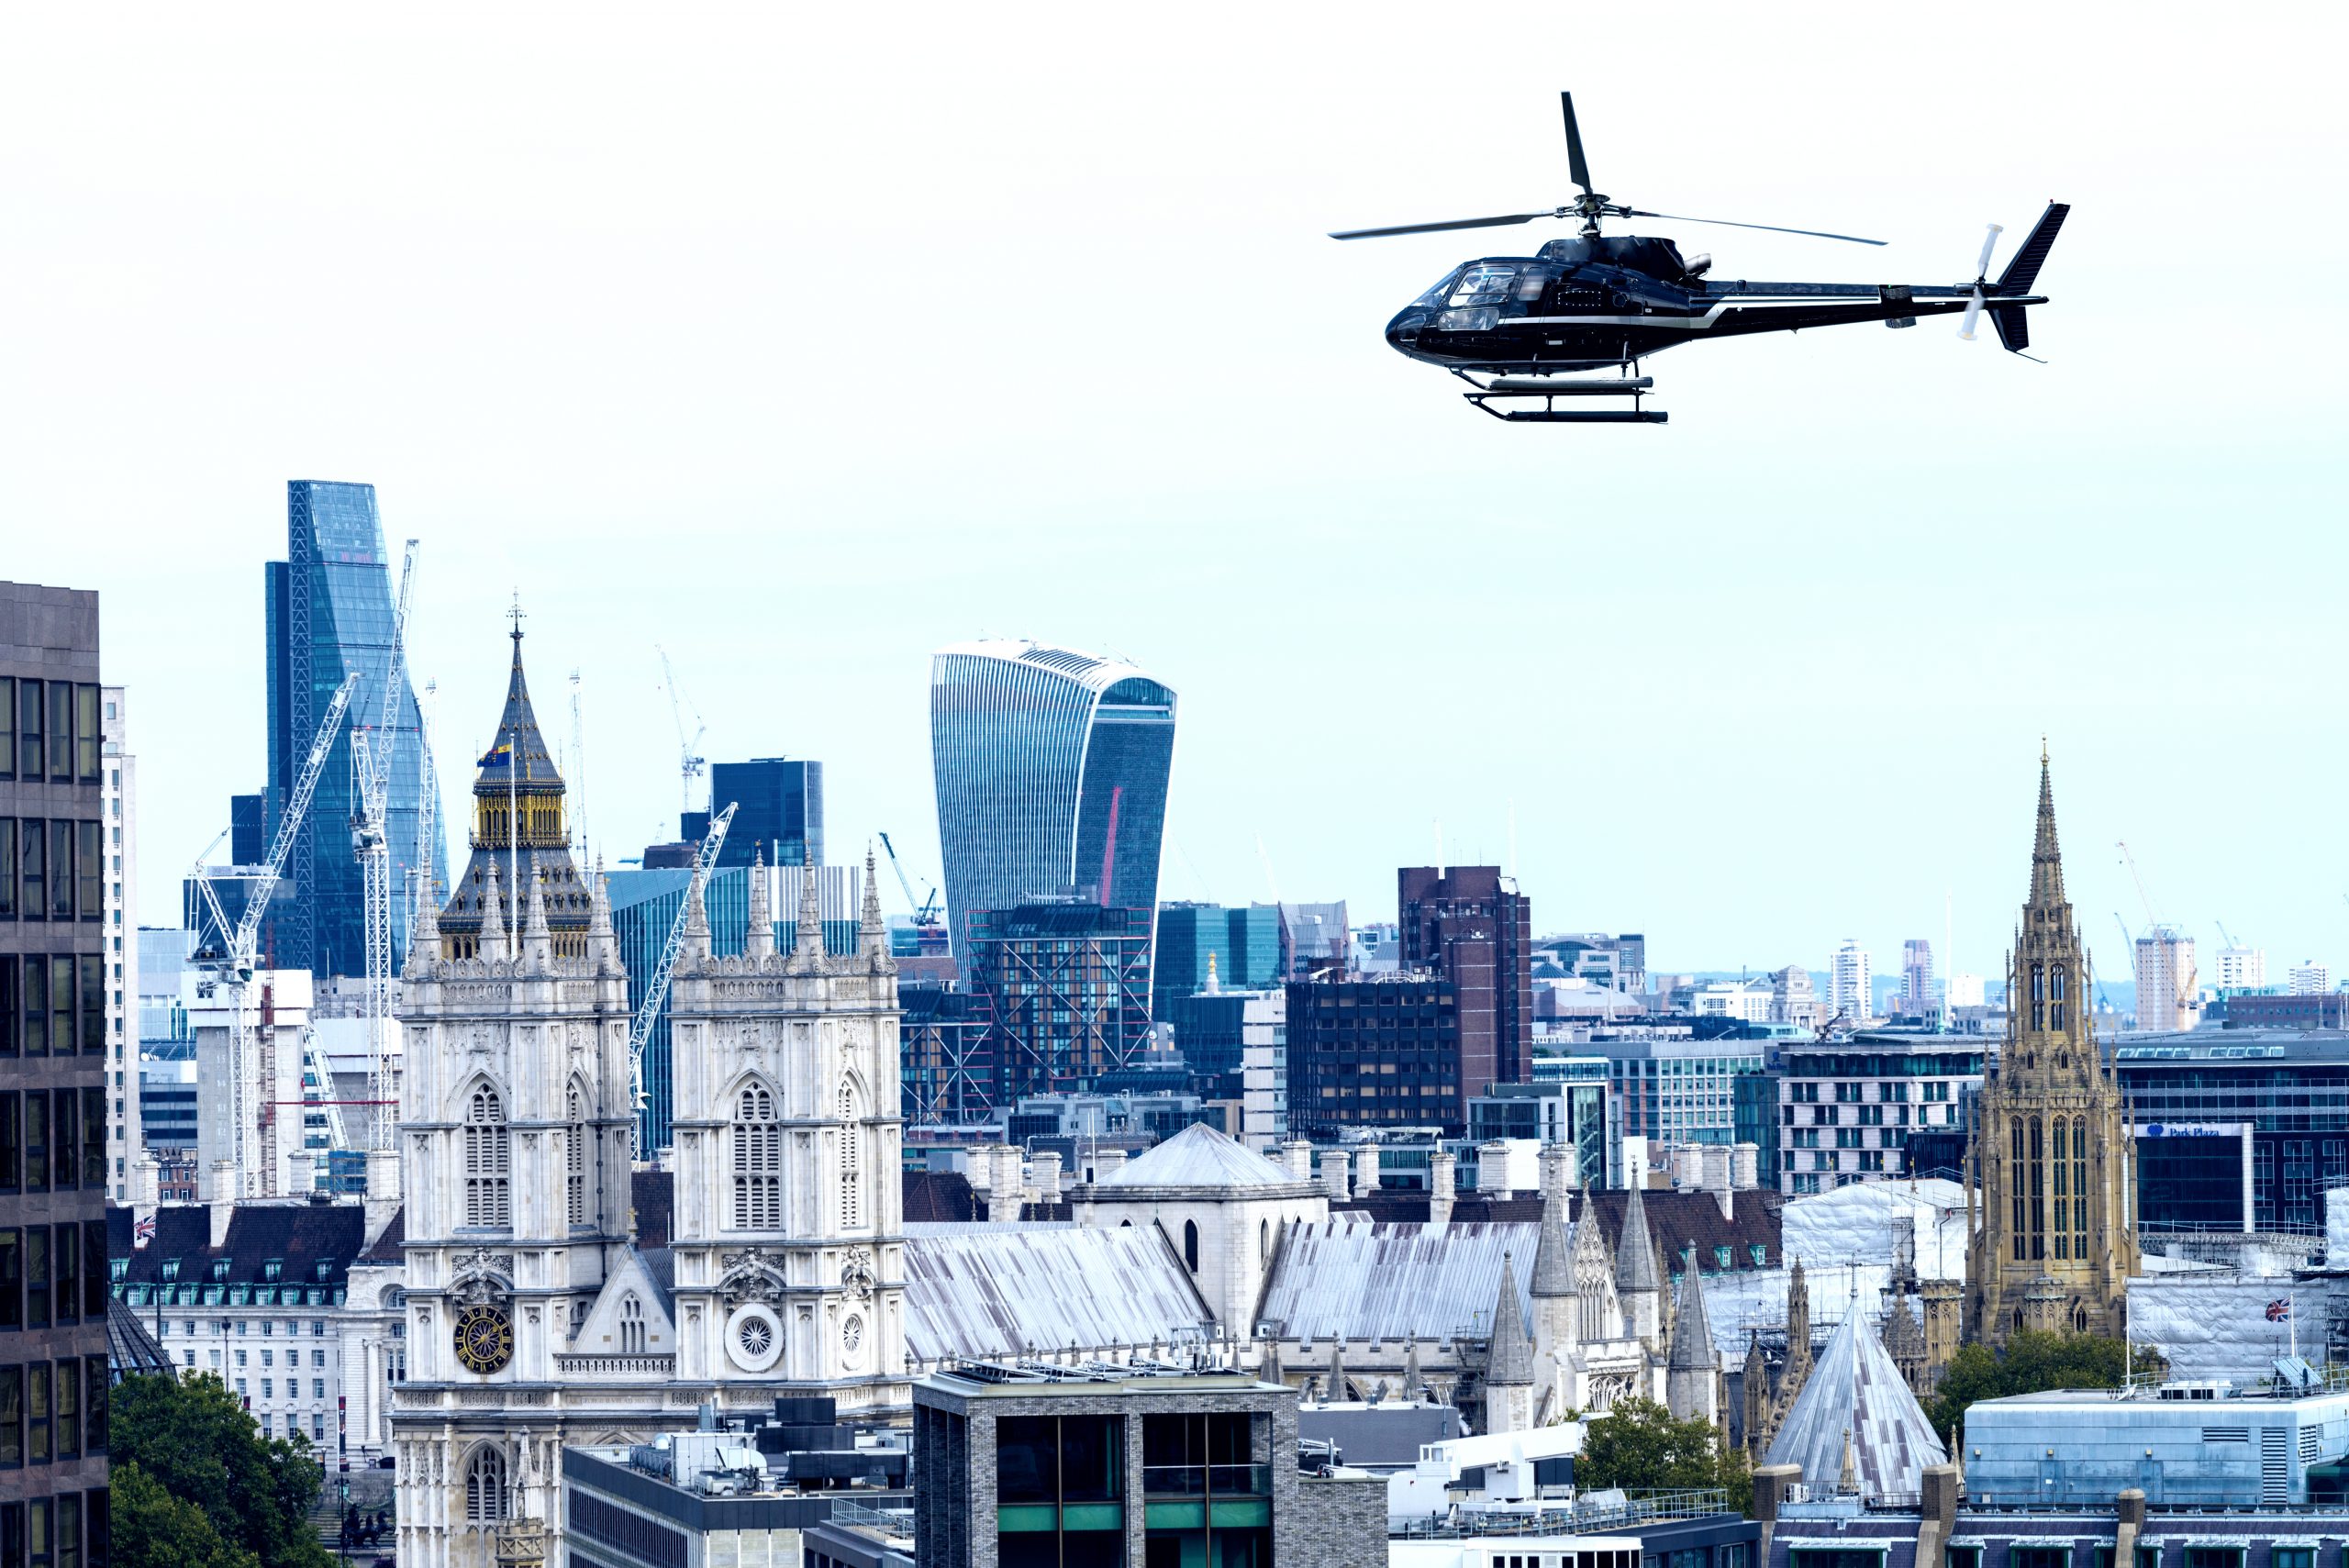 Helicopter over London skyline